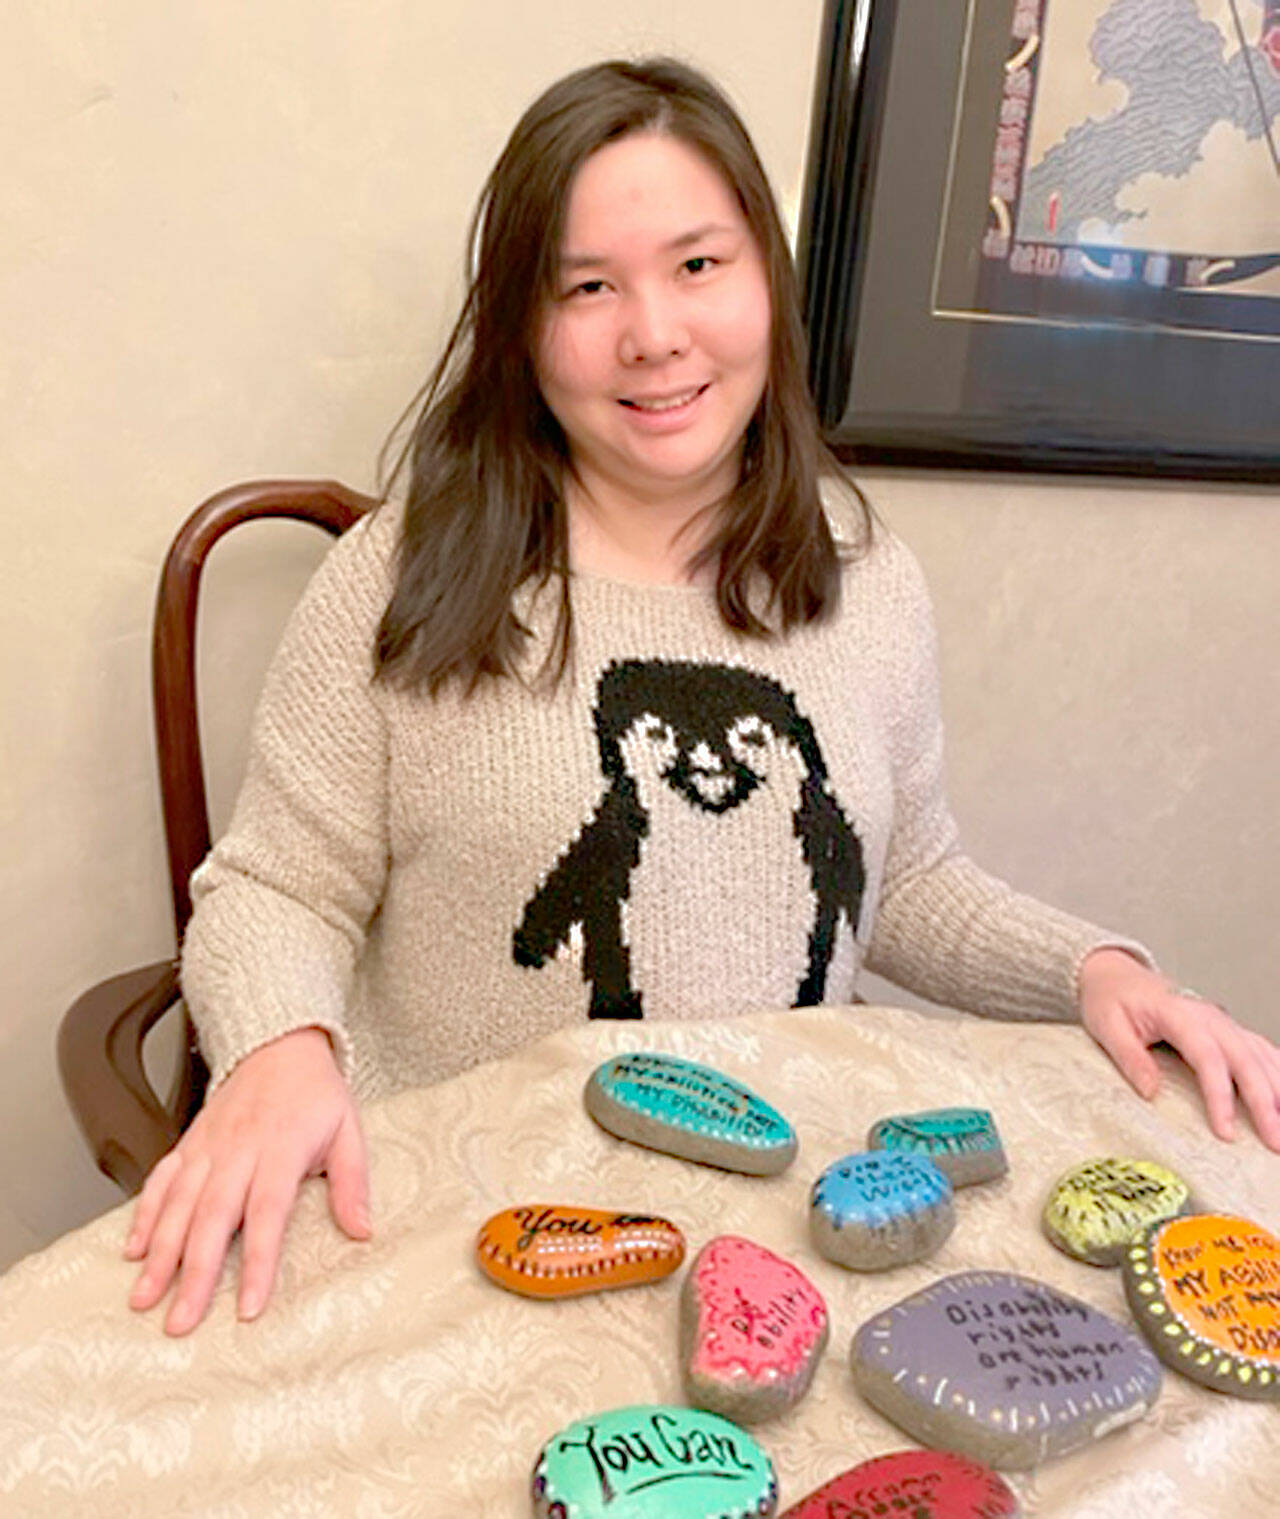 Photo courtesy of Helen Motokane
Christine Motokane displays some of the painted rocks she plans to place in public areas around Sequim and Port Angeles. Motokane is a self-advocate with autism, author of the memoir “Working the Double Shift: A Young Woman’s Journey with Autism,” a college graduate and a paraeducator.